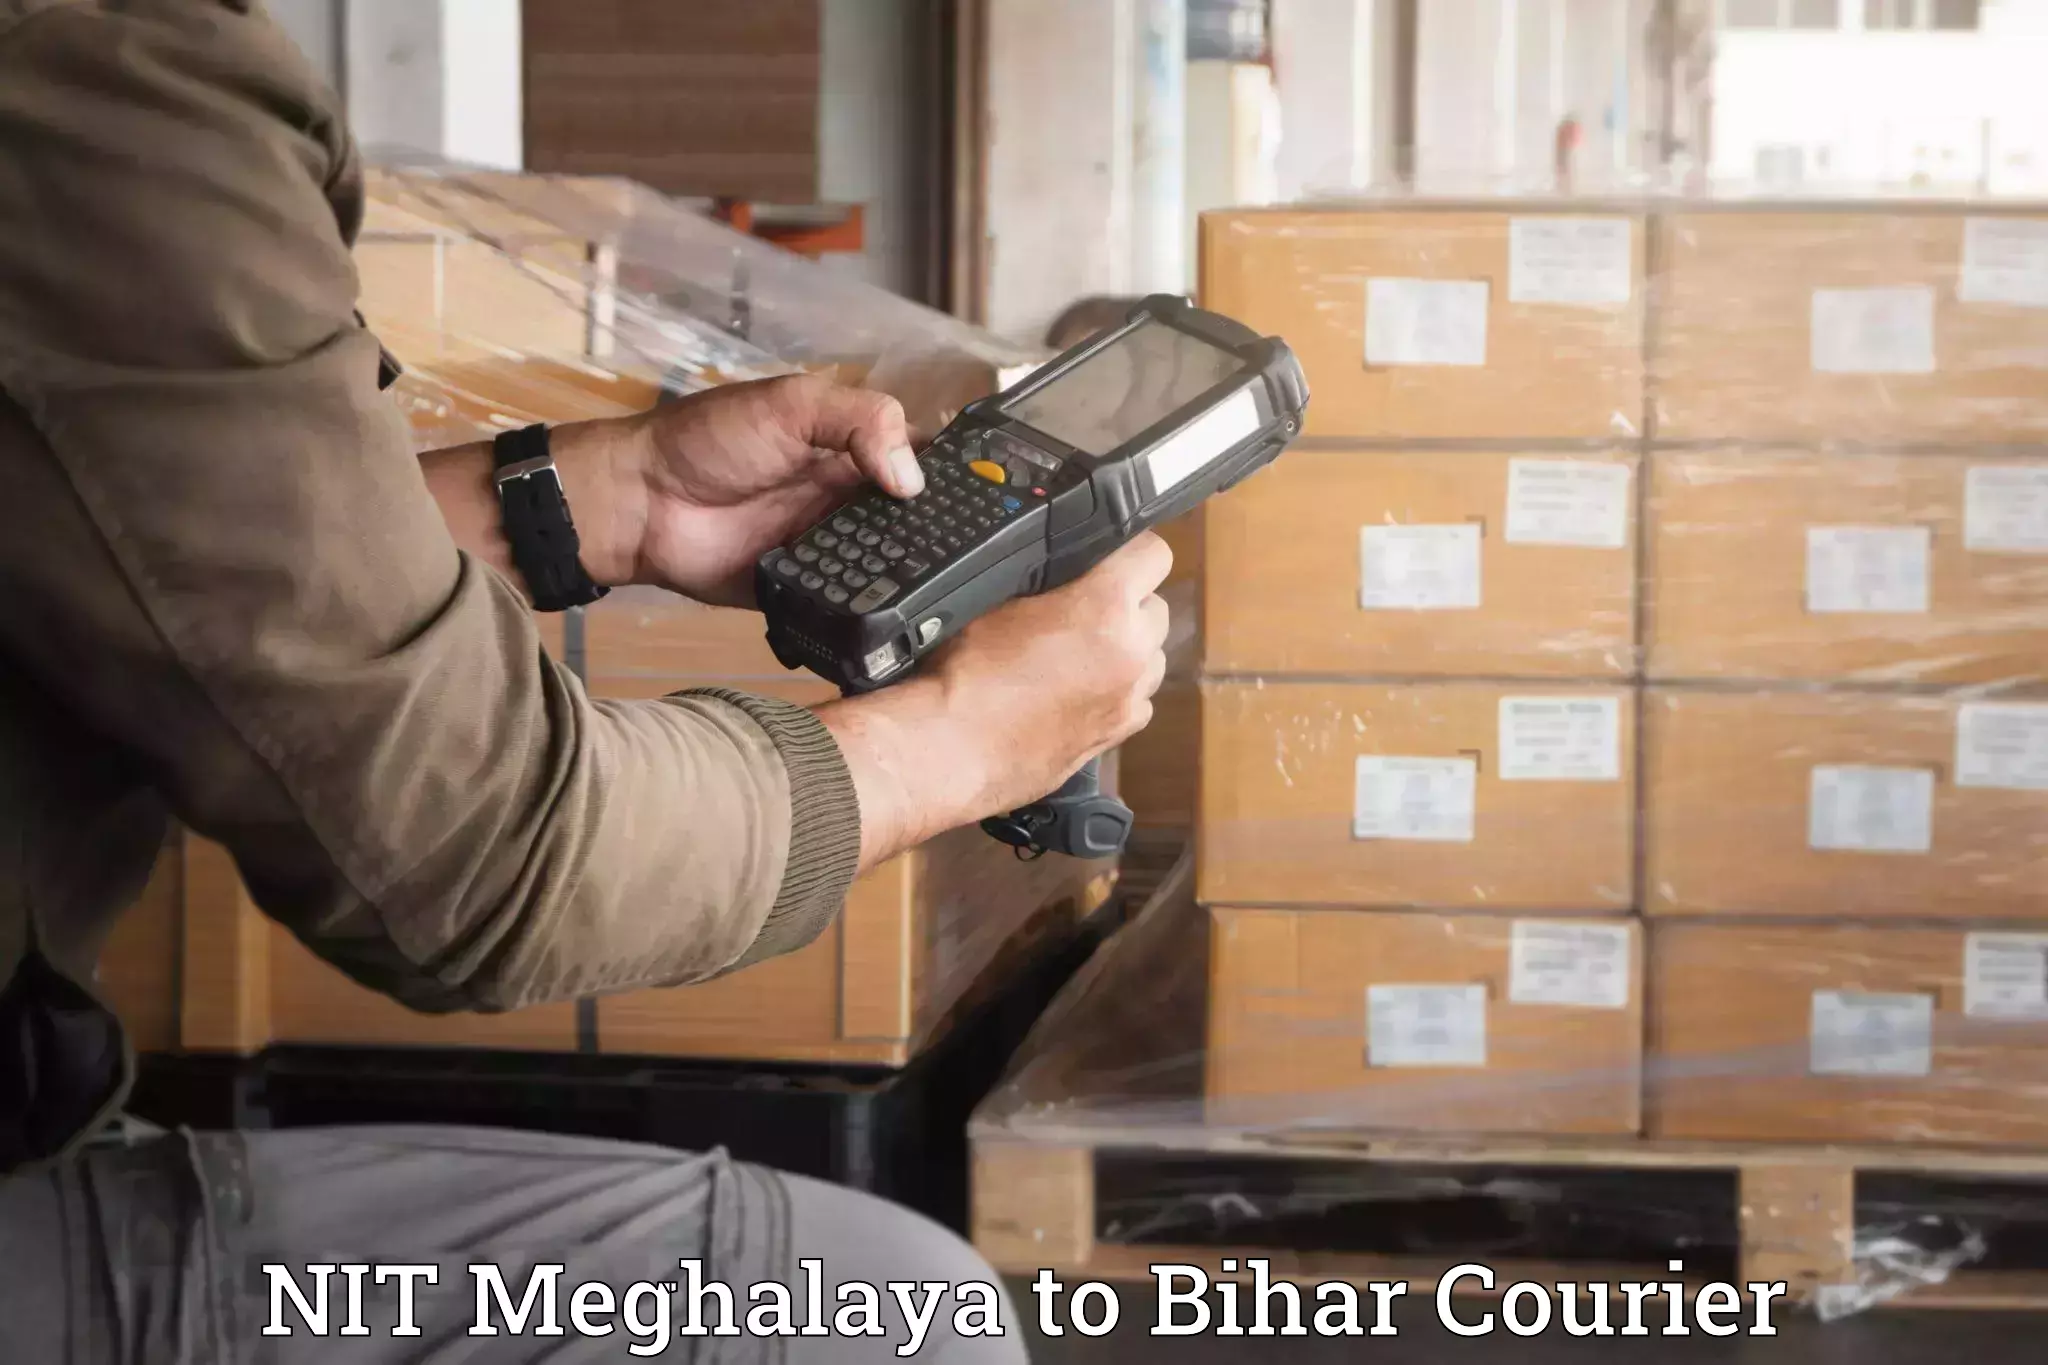 Moving and packing experts NIT Meghalaya to Bihar